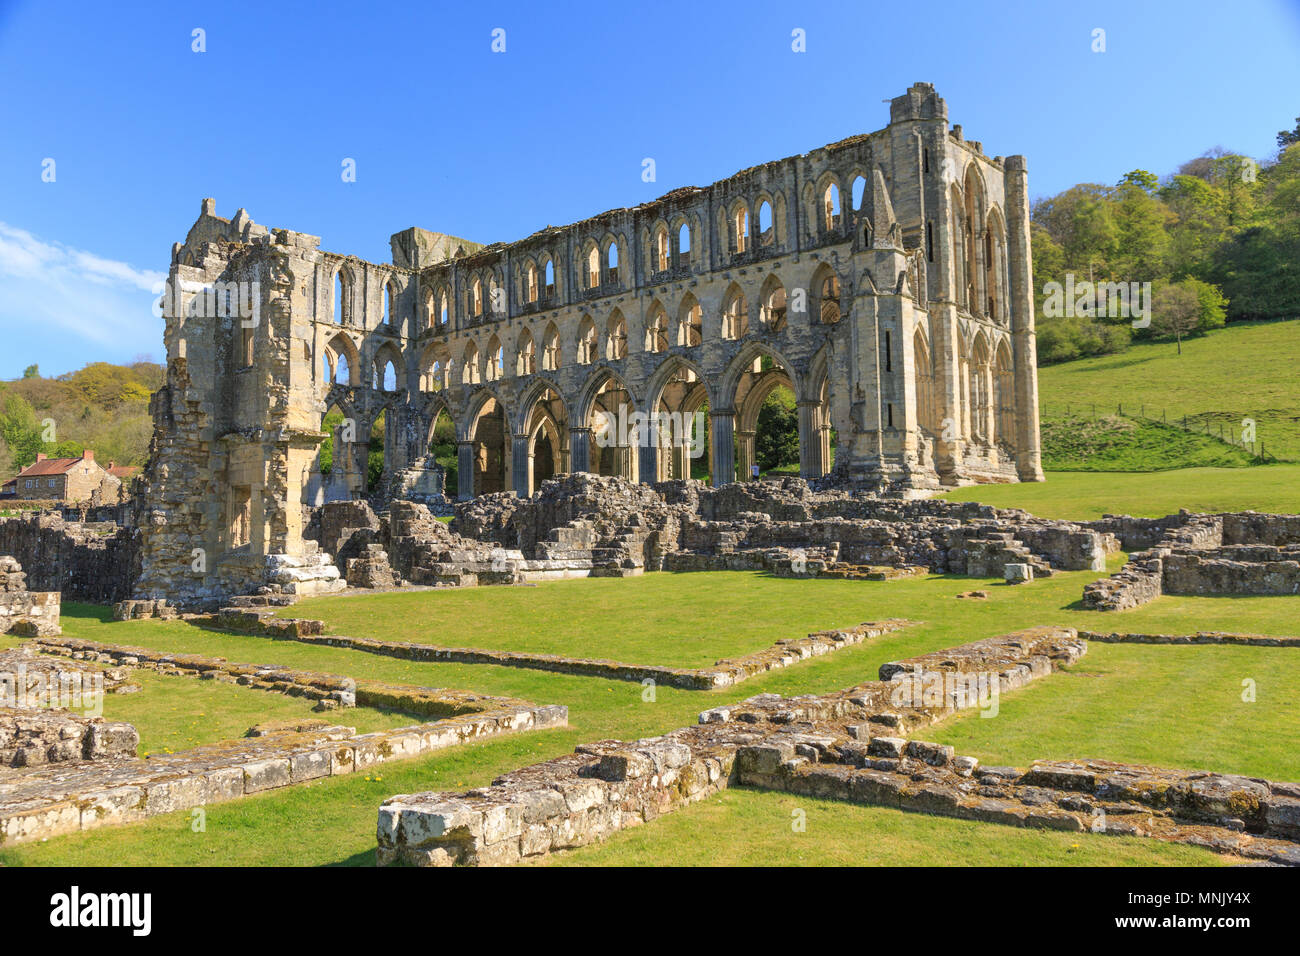 England, North Yorkshire, Rievaulx. 13th c. Cistercian ruins of Rievaulx Abbey. English Heritage  and National Trust Site. Near River Rye. Stock Photo